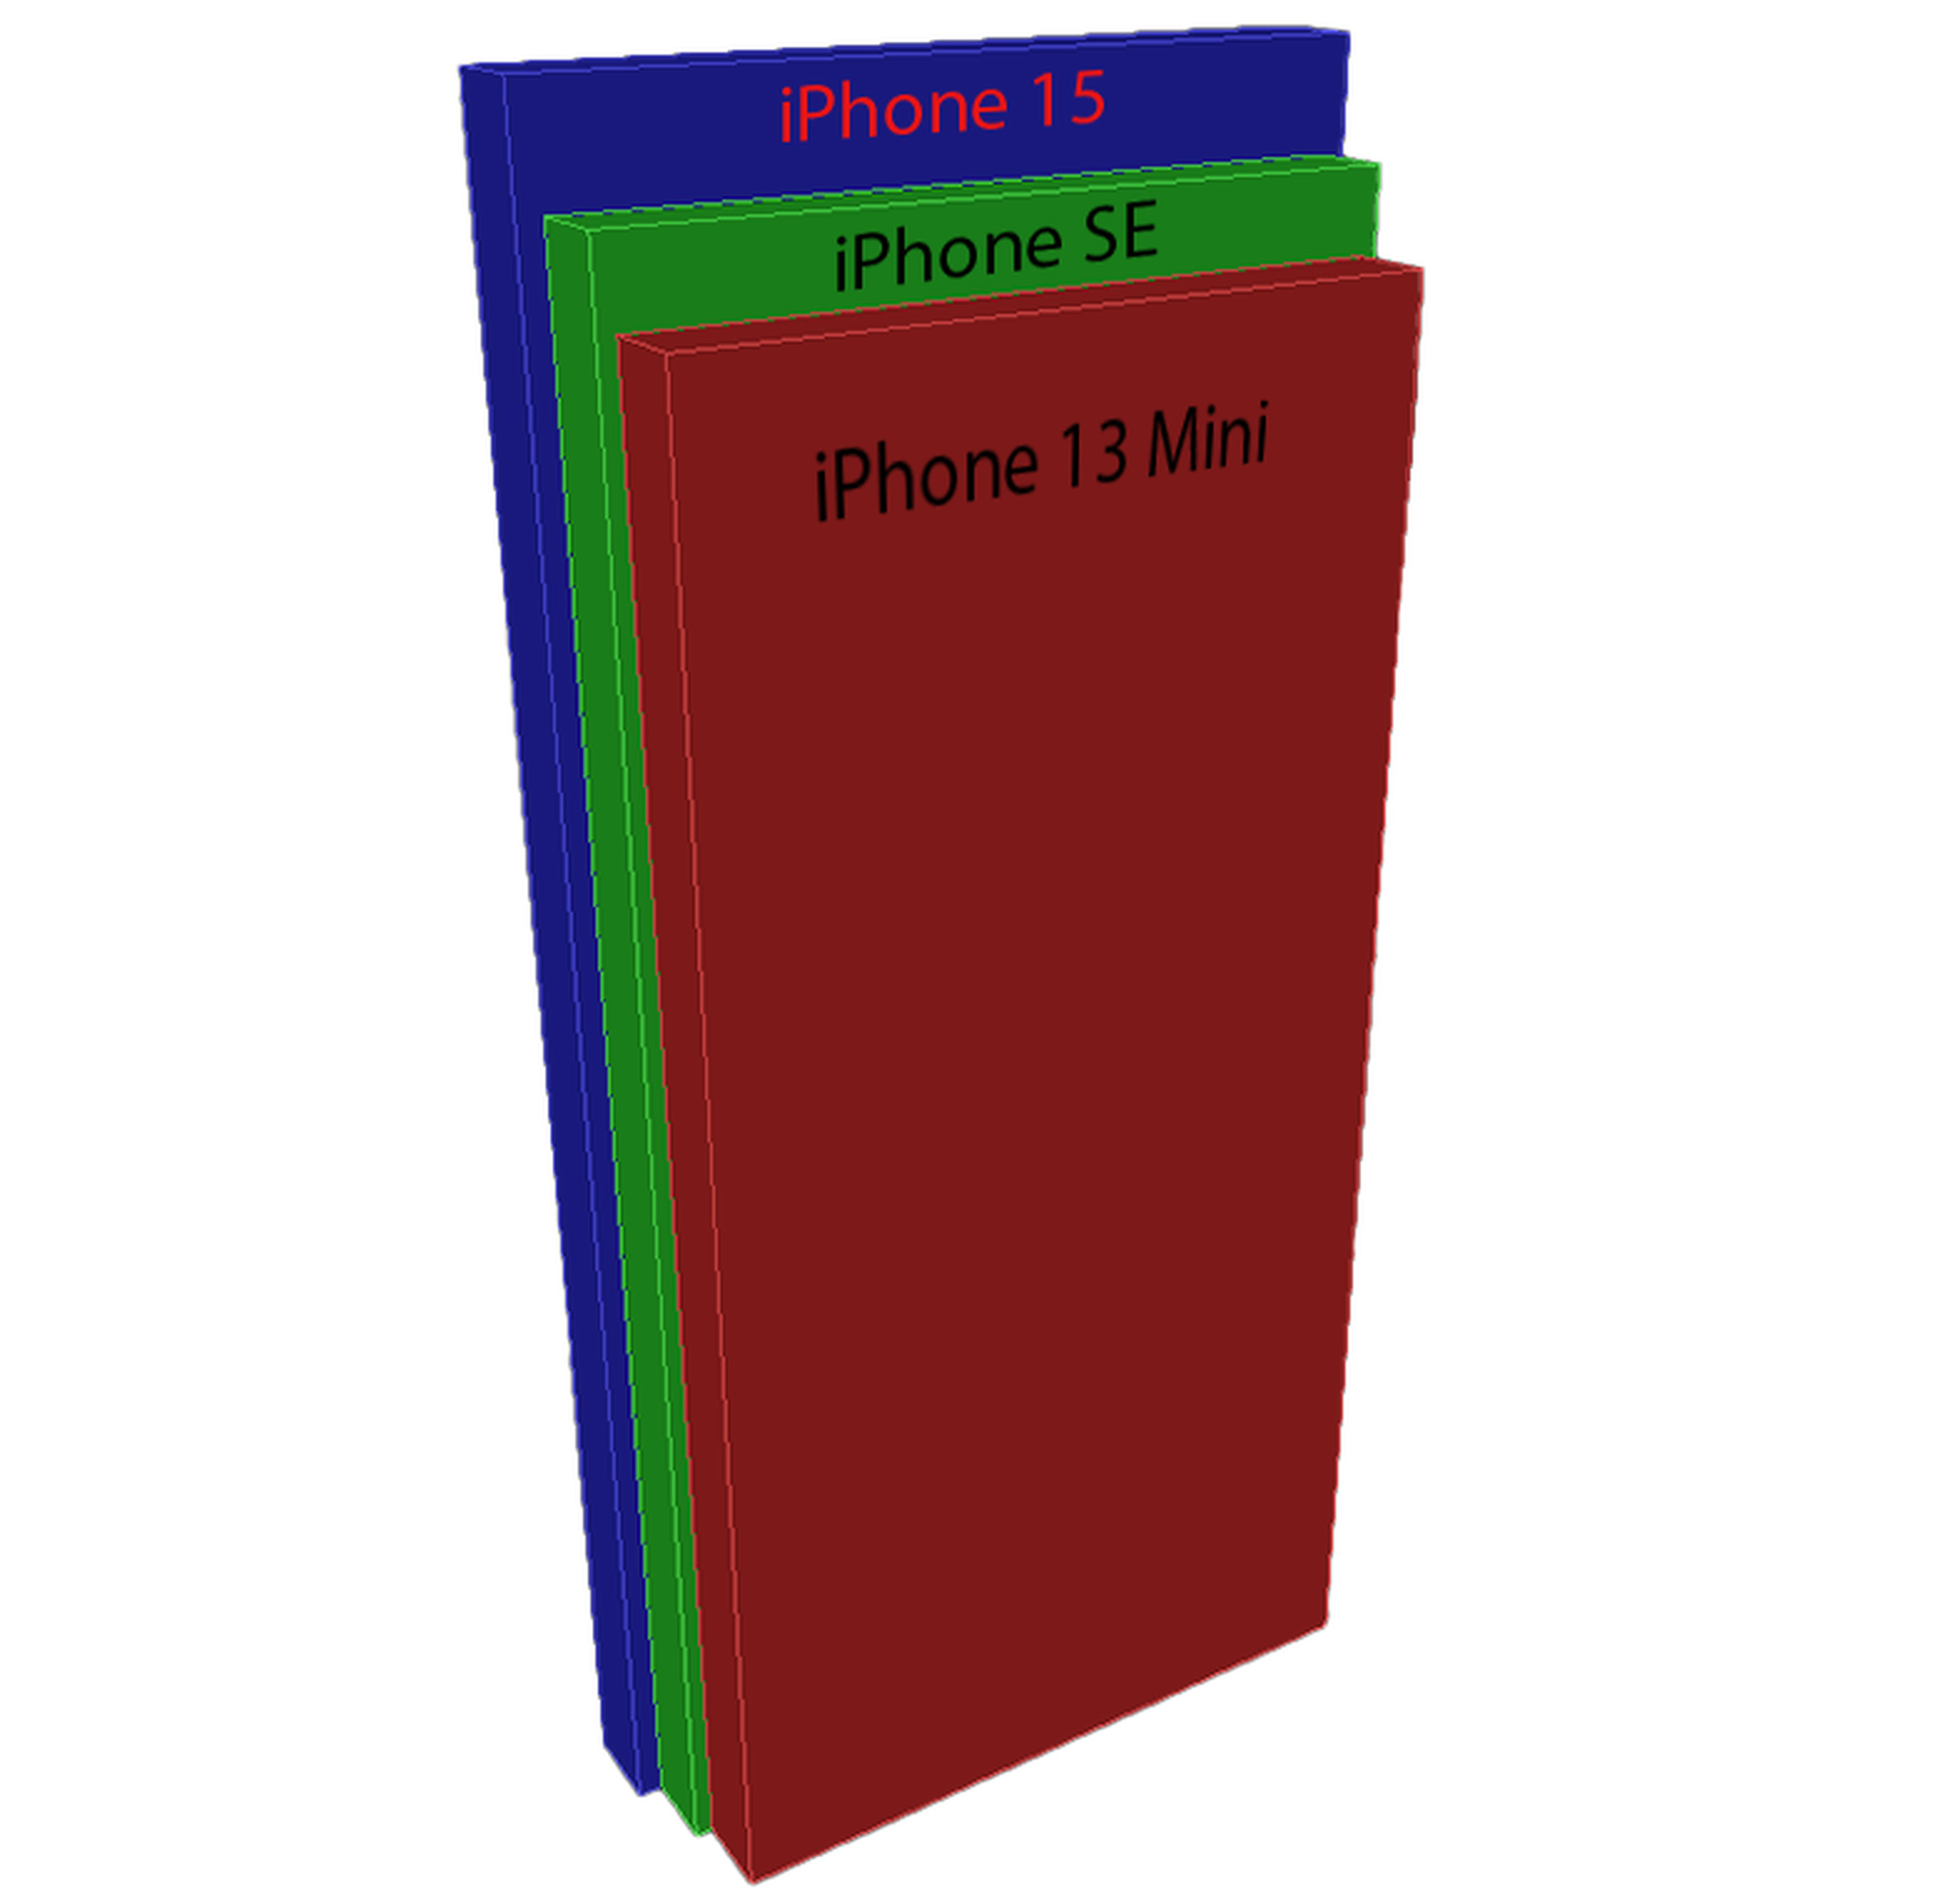 Colored size comparison boxes representing the iPhone 13 Mini, iPhone SE, and iPhone 15 show the SE is halfway between a Mini and a full-size phone.